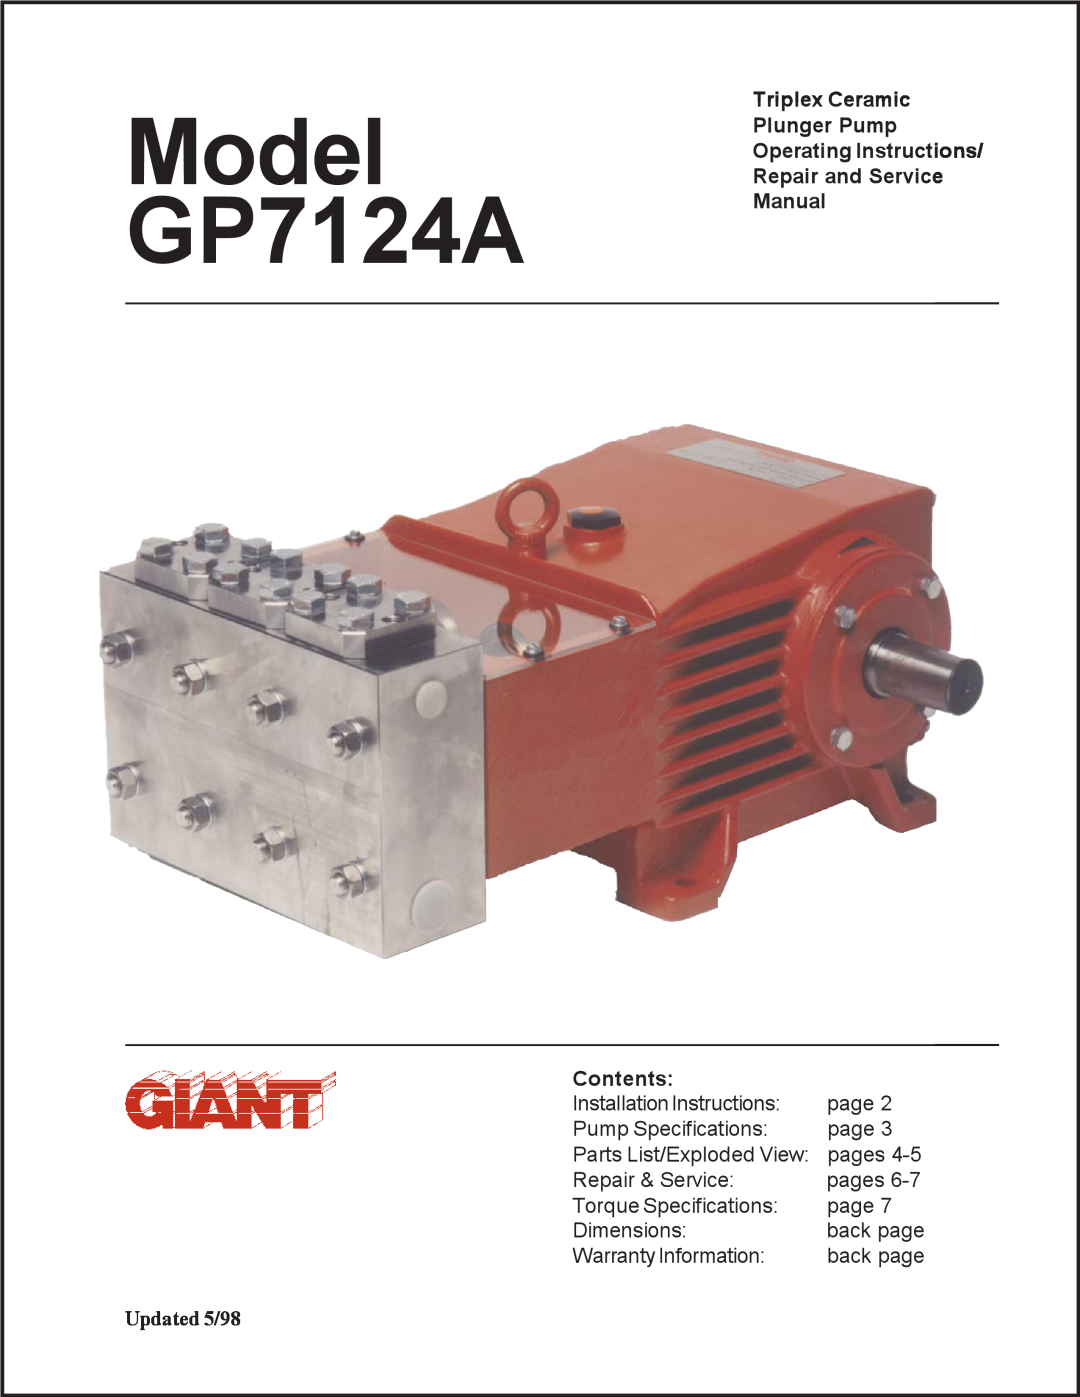 Giant GP7124A installation instructions Triplex Ceramic Plunger Pump Operating Instructions, Repair and Service Manual 